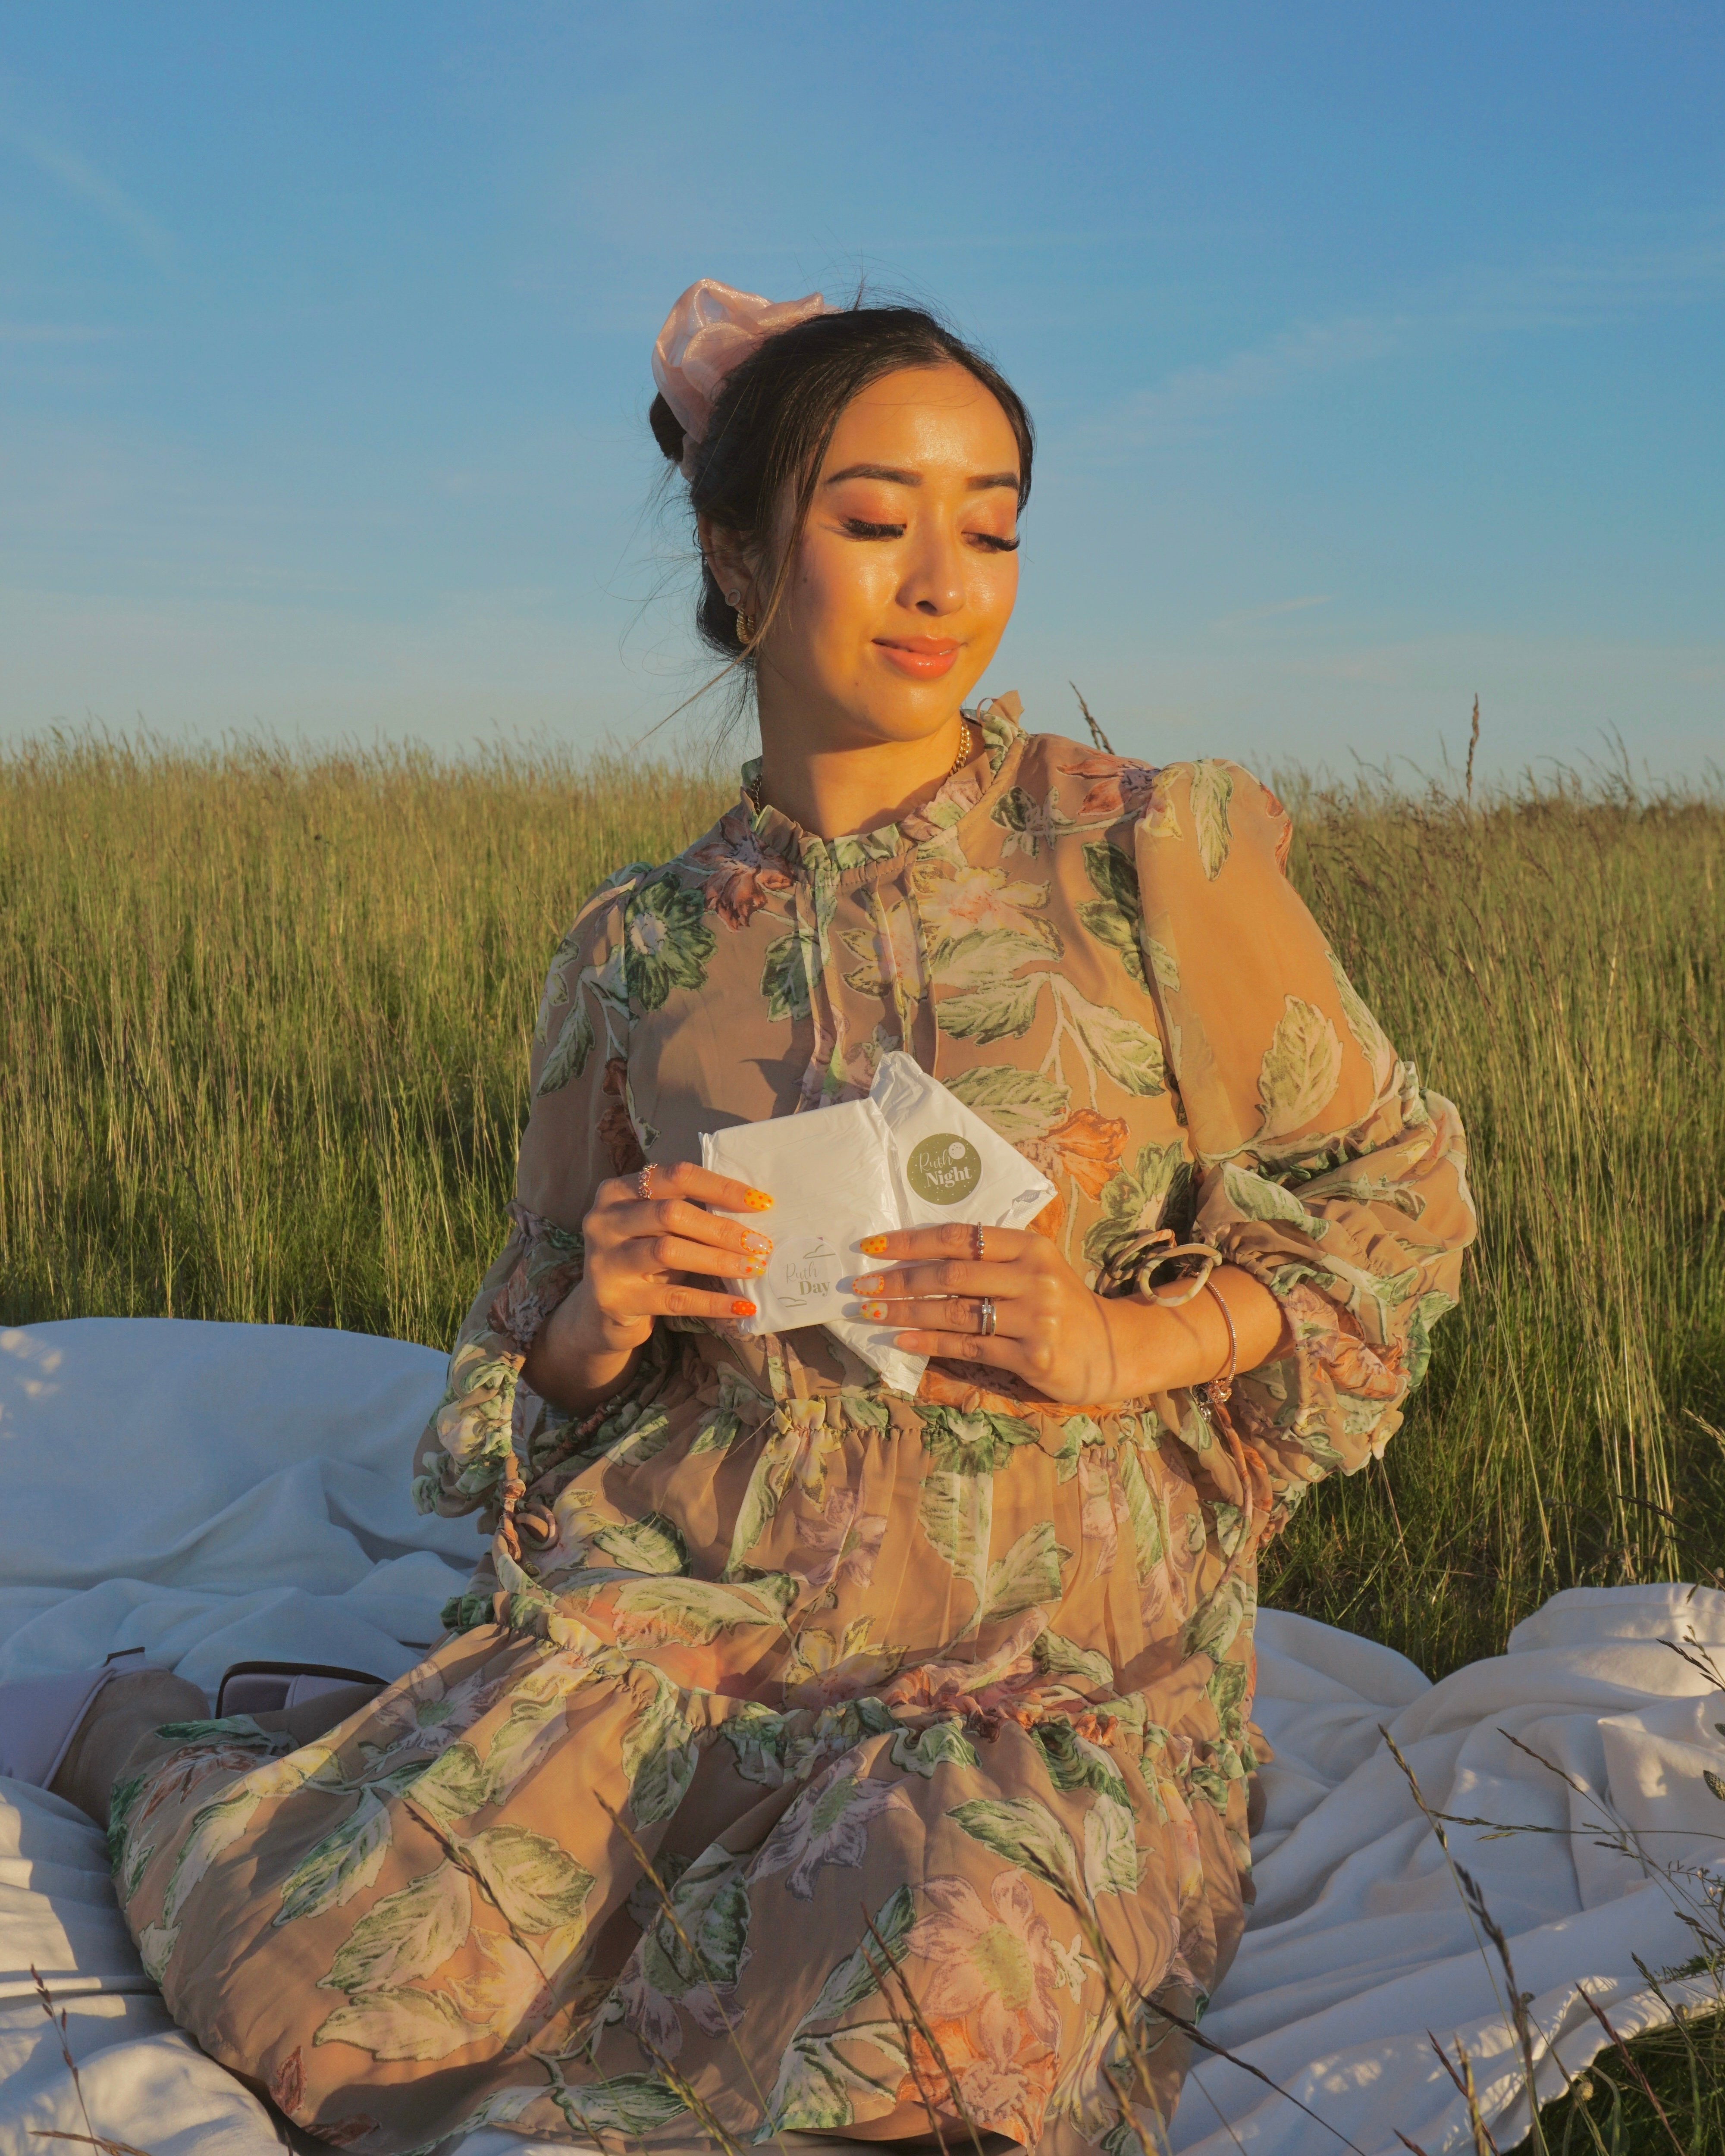 Girl with her eyes closed, sitting in field on a blanket during sunset, holding a Ruth day and a Ruth night pad 